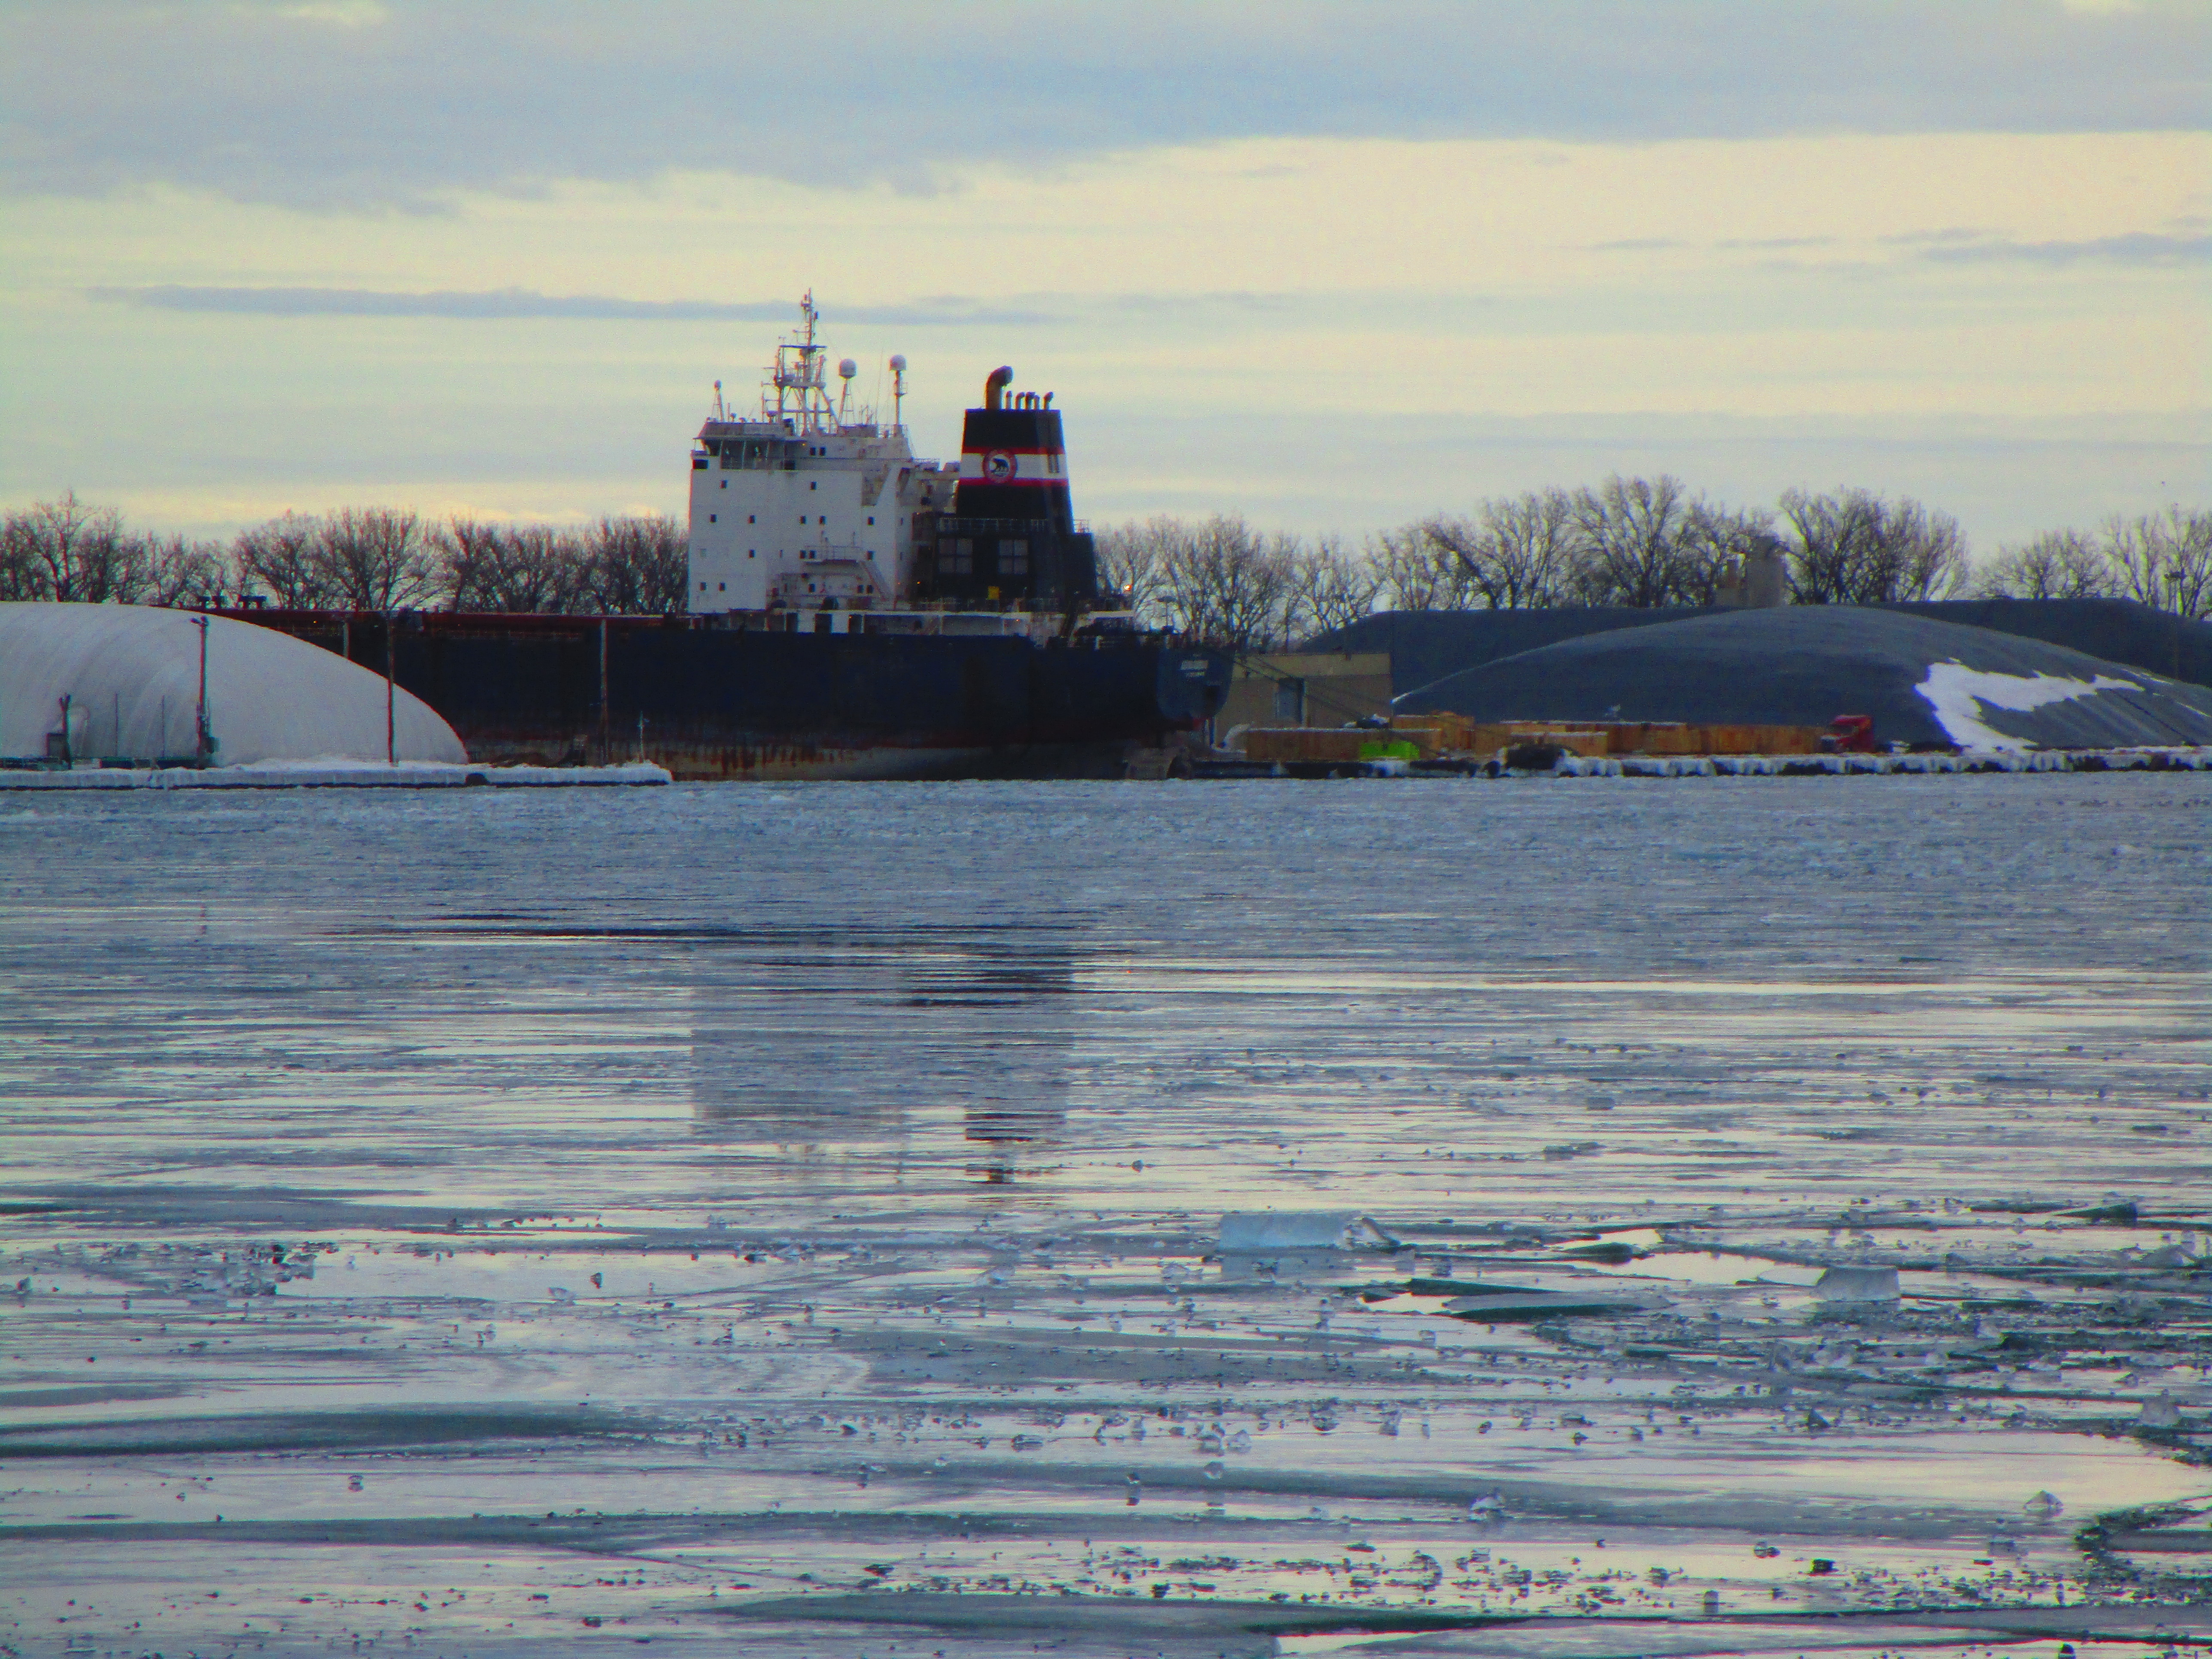 Lake freighter moored in toronto's ship channel, 2018 01 11 -aa photo